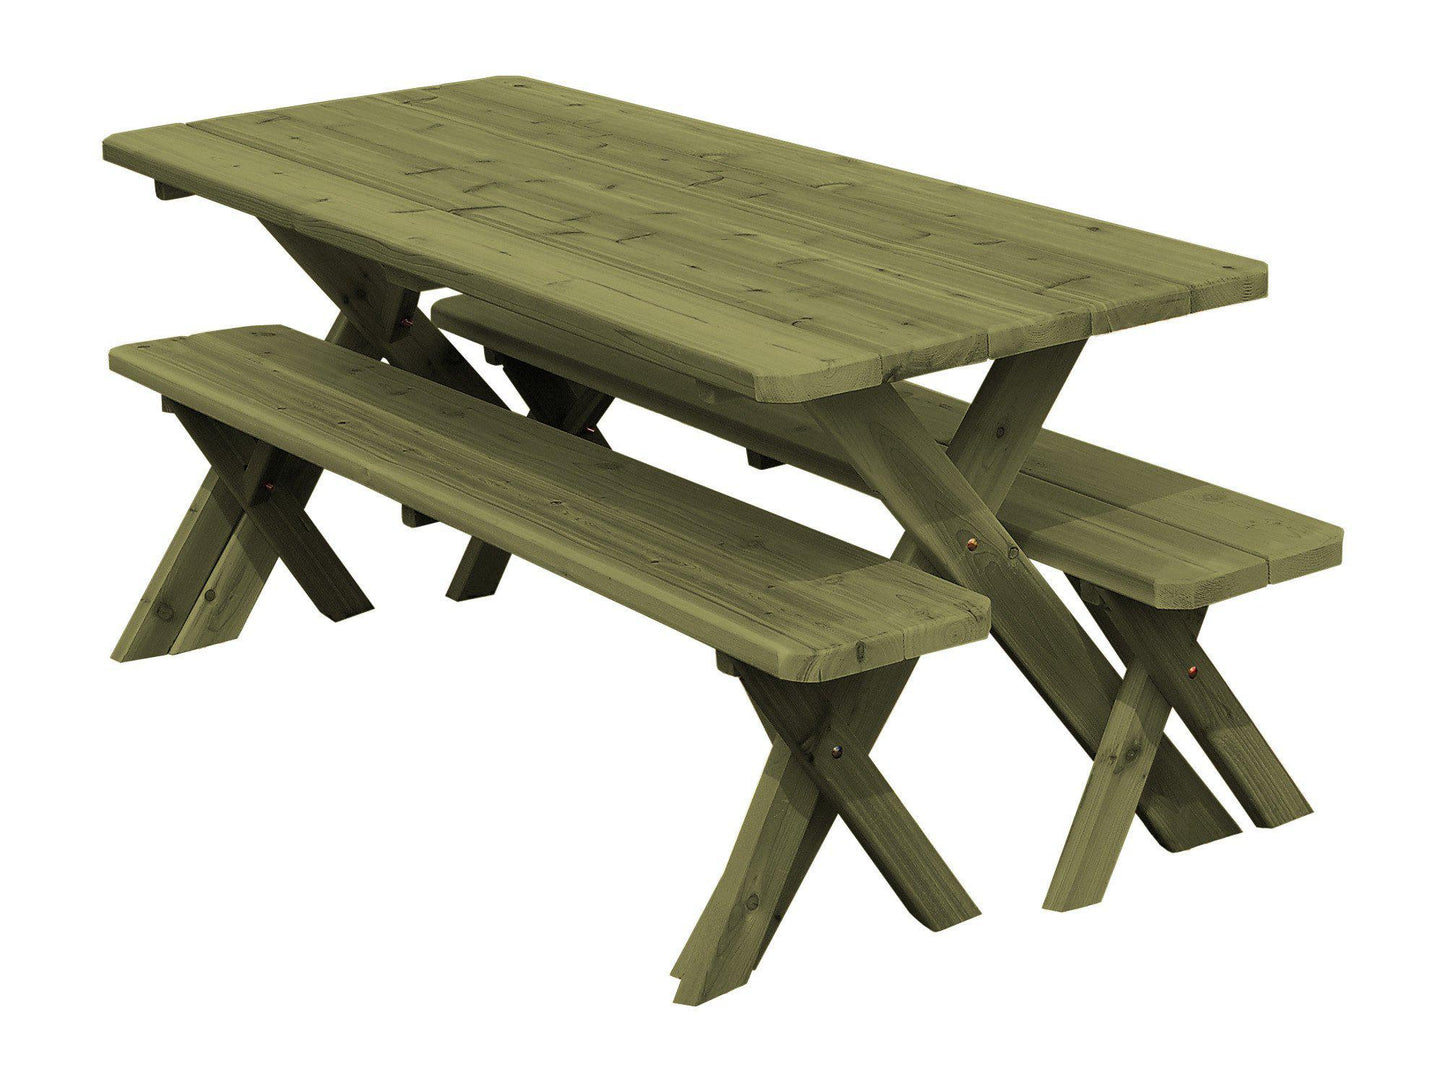 A&L FURNITURE CO. Western Red Cedar 94" Cross-leg Table w/2 Benches - Specify for FREE 2" Umbrella Hole - LEAD TIME TO SHIP 2 WEEKS